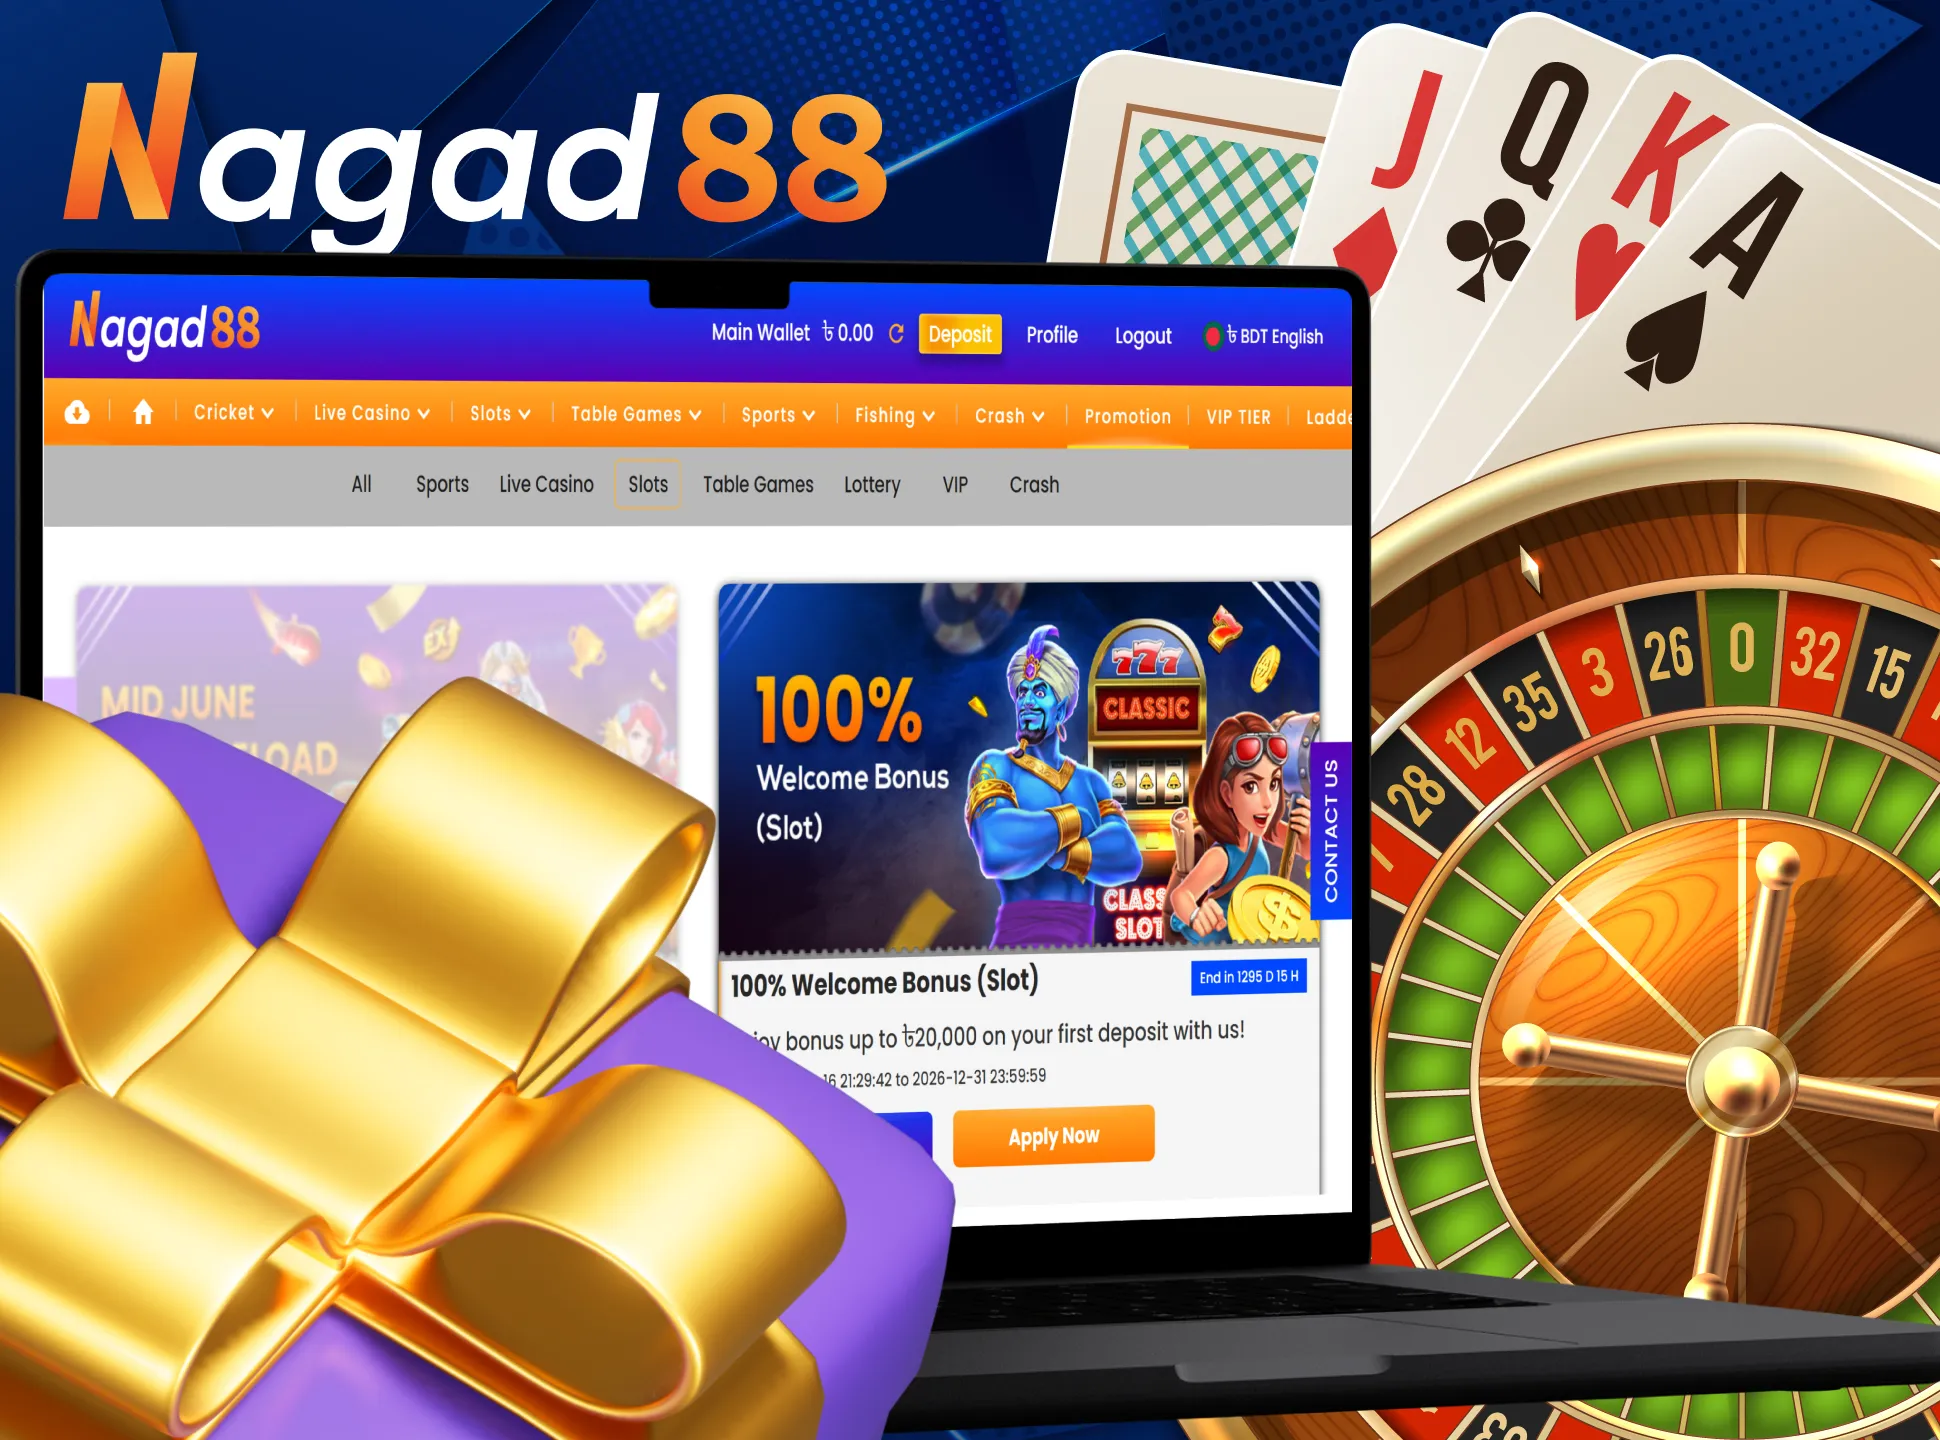 Be sure to get welcome casino bonus from Nagad88.